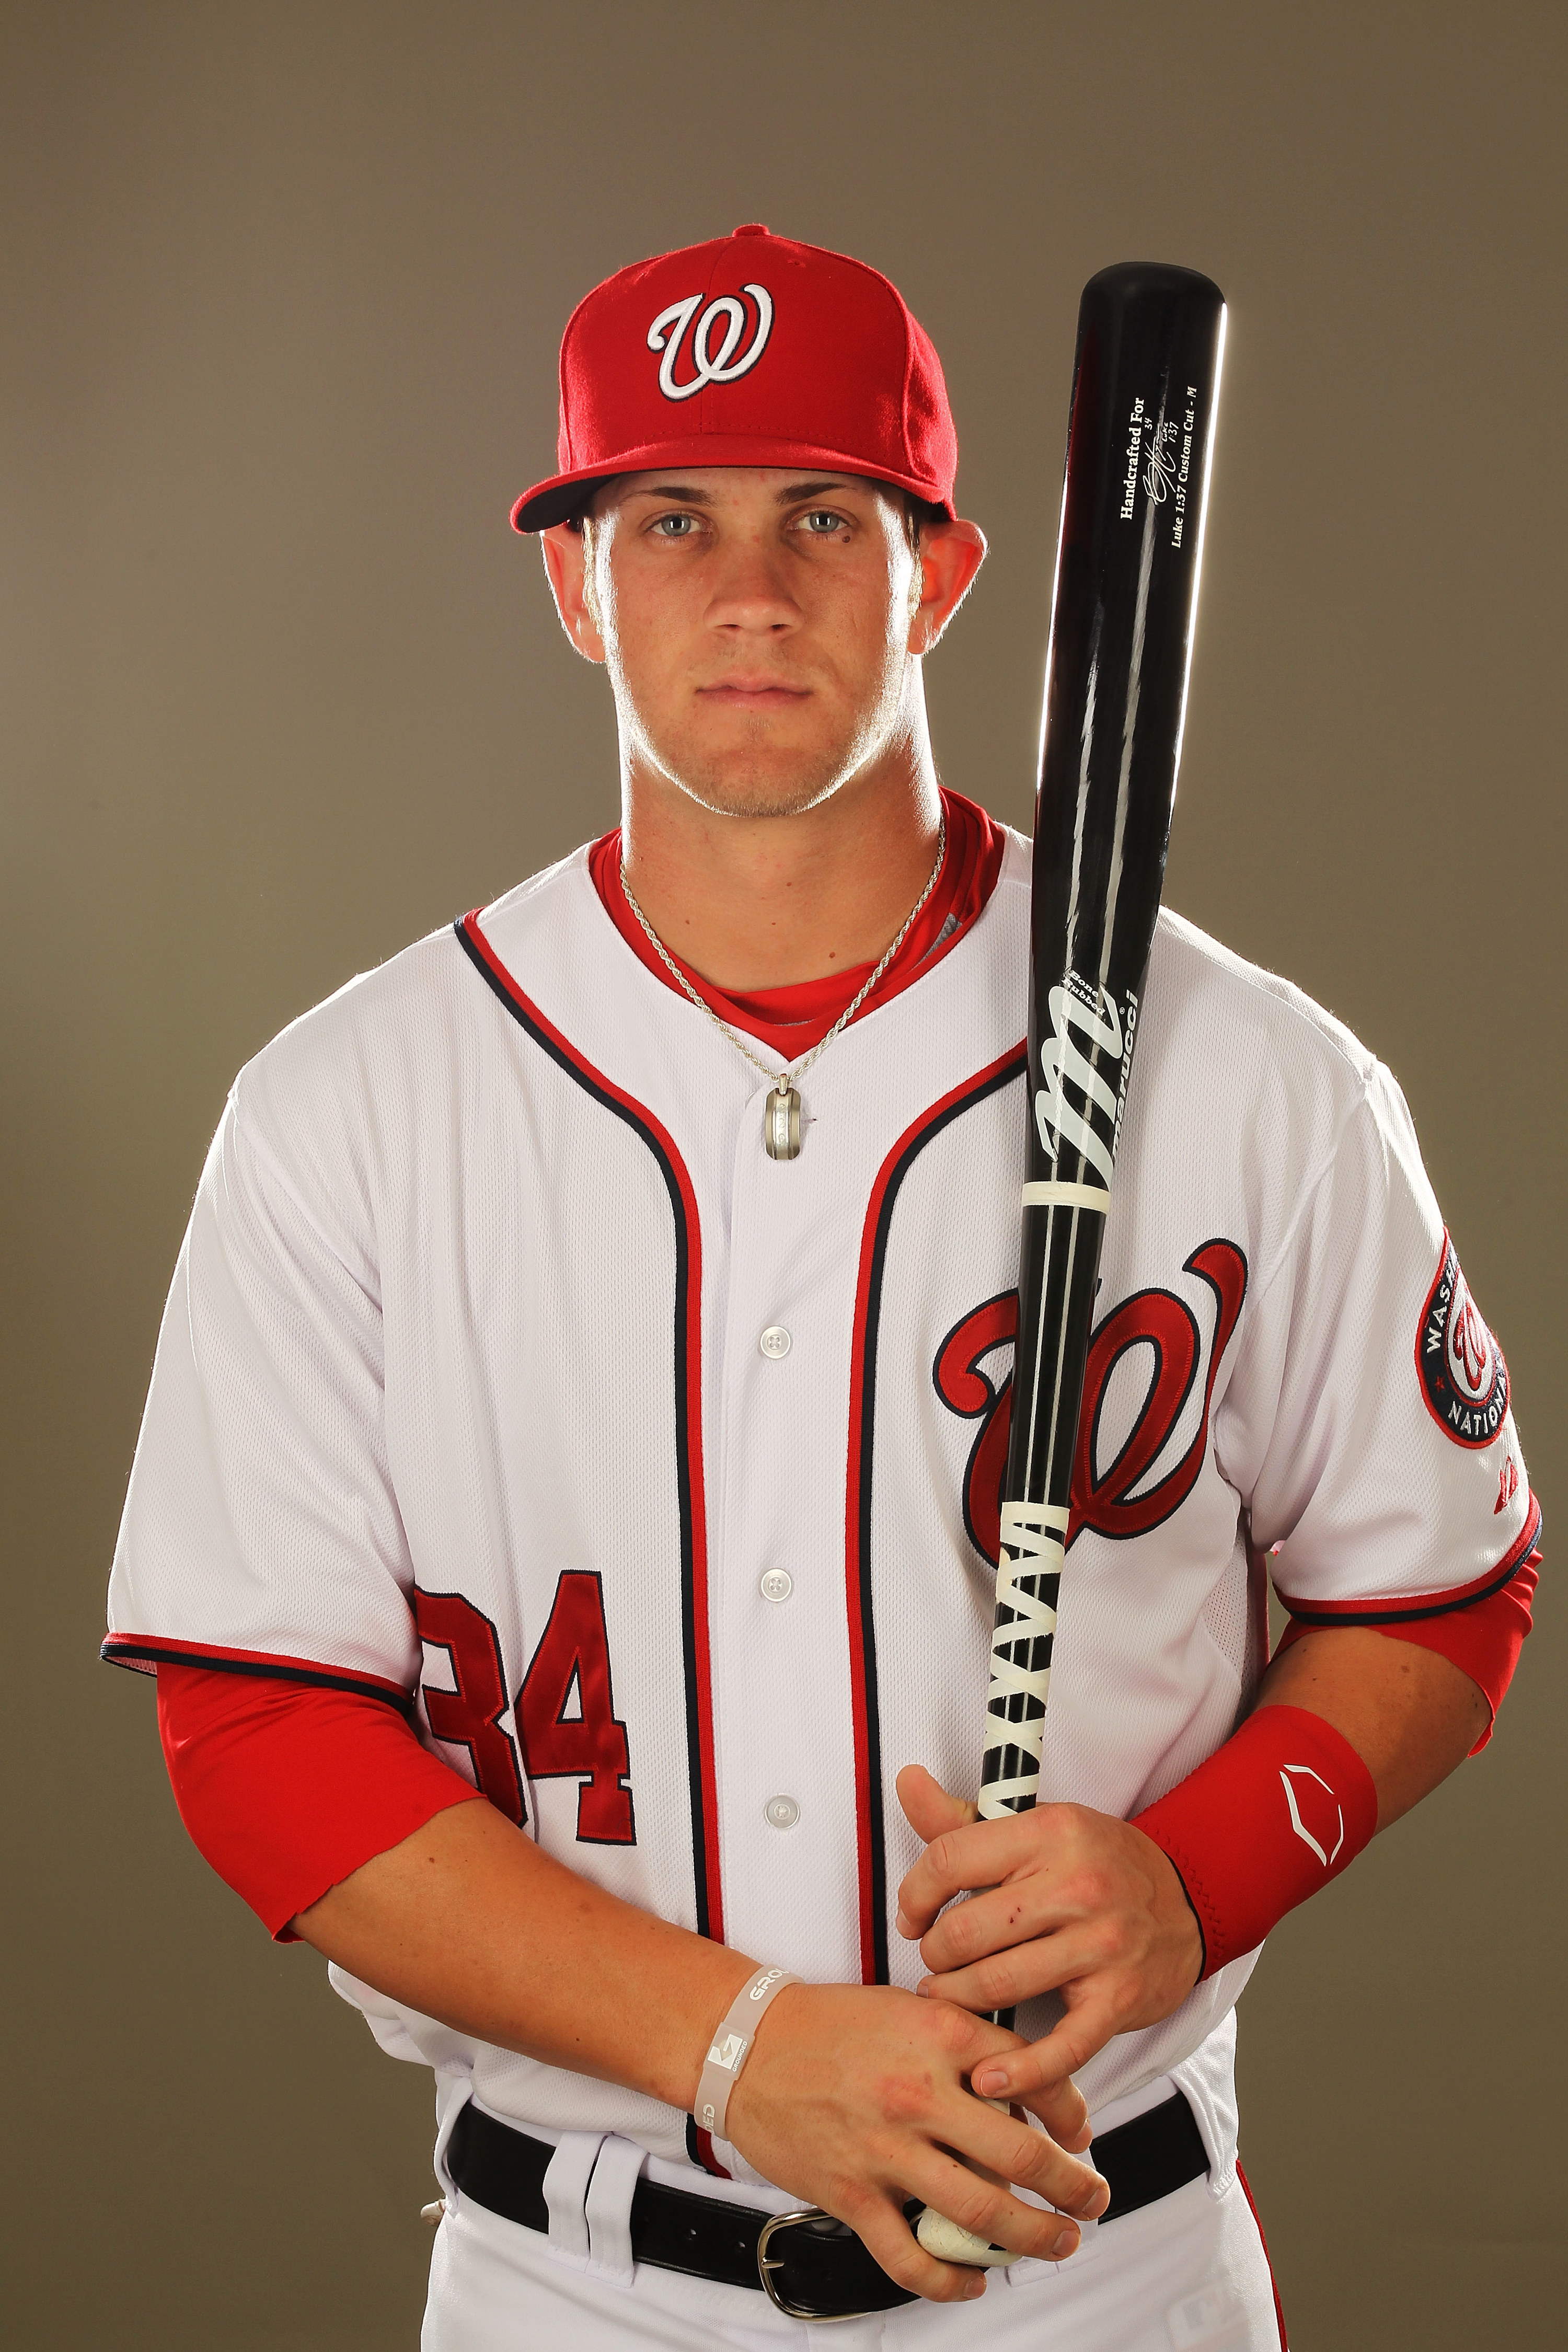 prospect Bryce Harper's 2012 rookie photo in his Washington Nationals ...